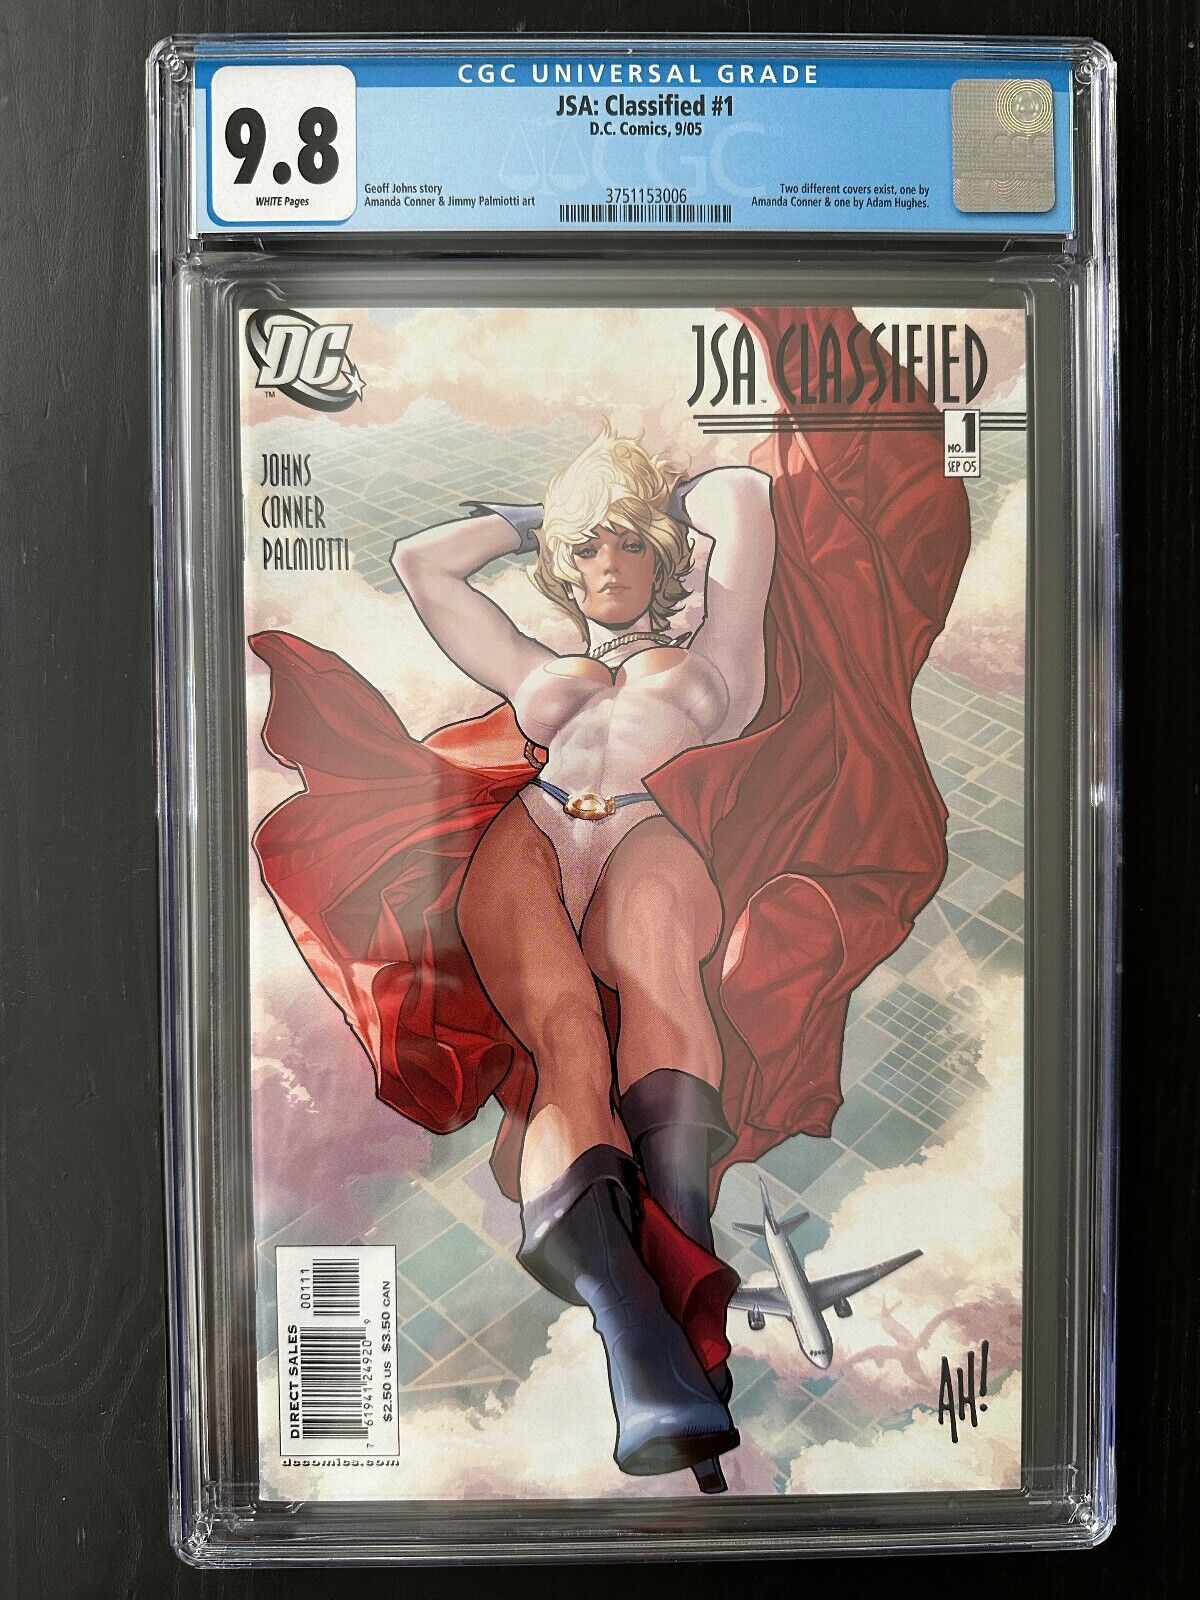 JSA Classified #1 CGC 9.8/Adam Hughes cover, white pages